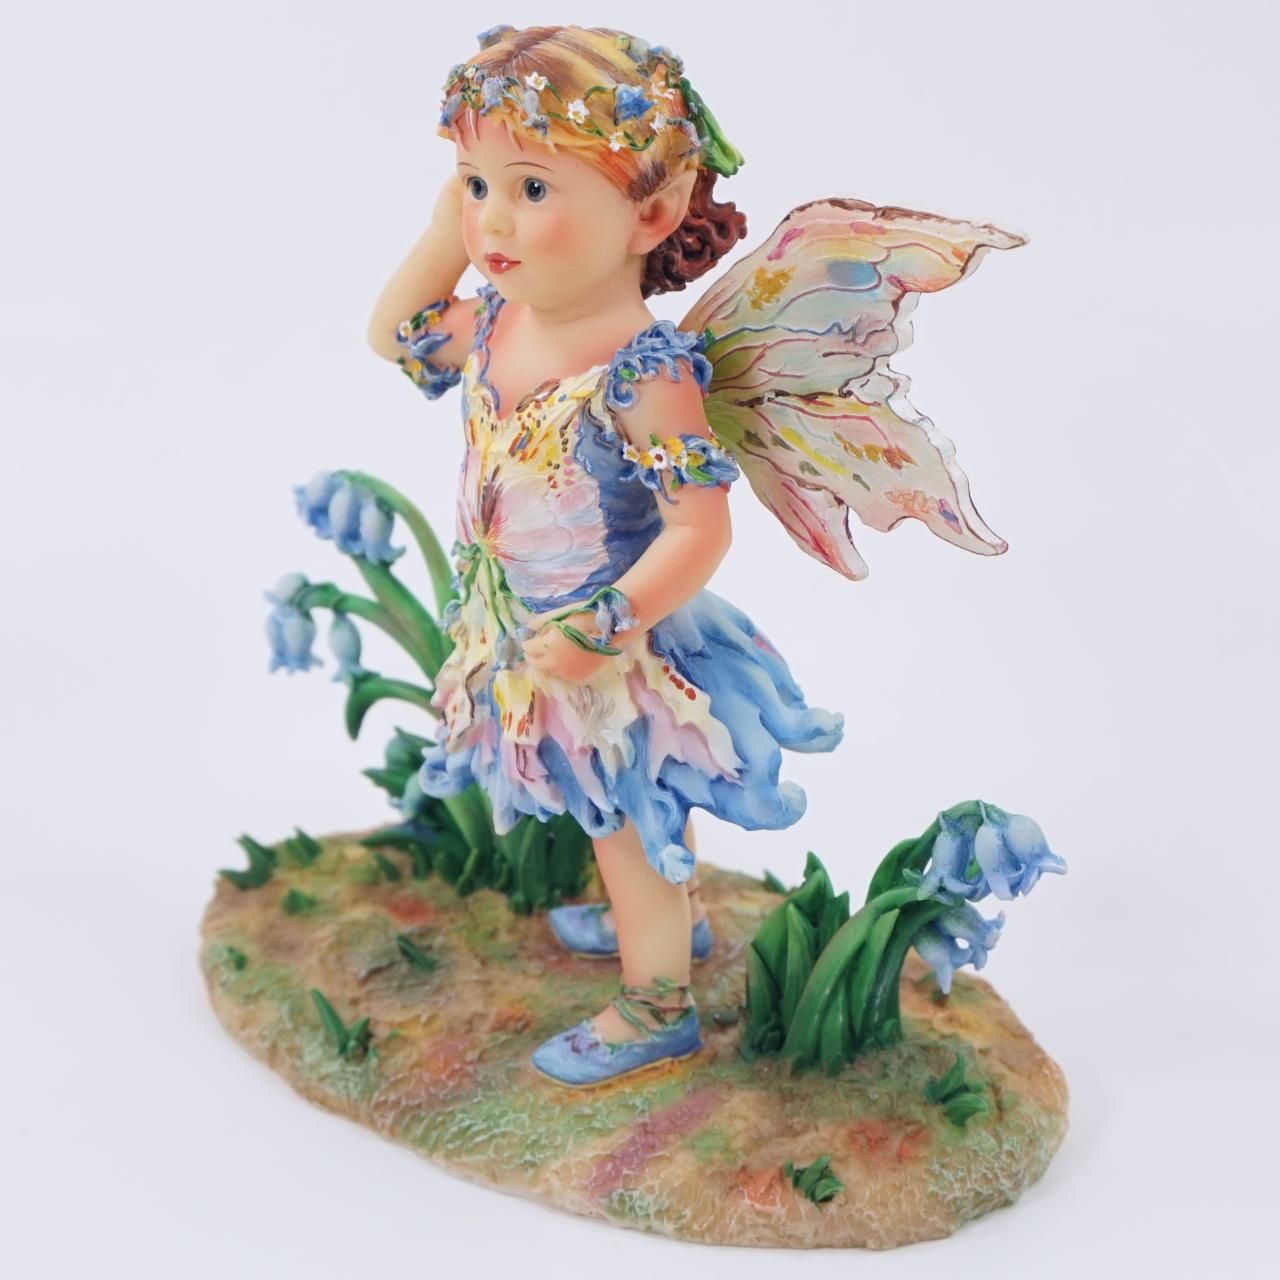 Crisalis Collection★ Wooded Bluebell Faerie (1-3414) Standard